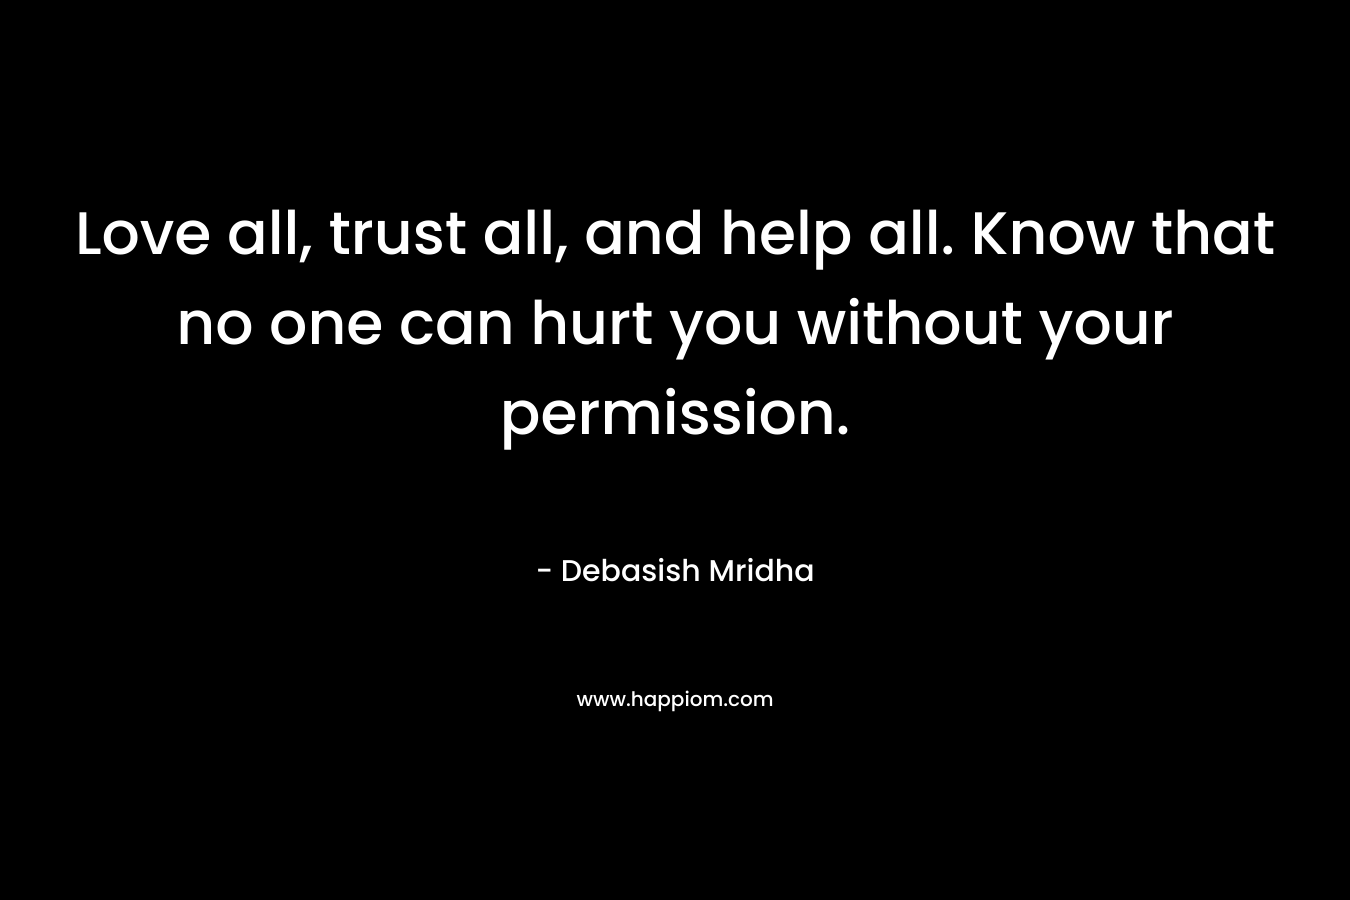 Love all, trust all, and help all. Know that no one can hurt you without your permission.